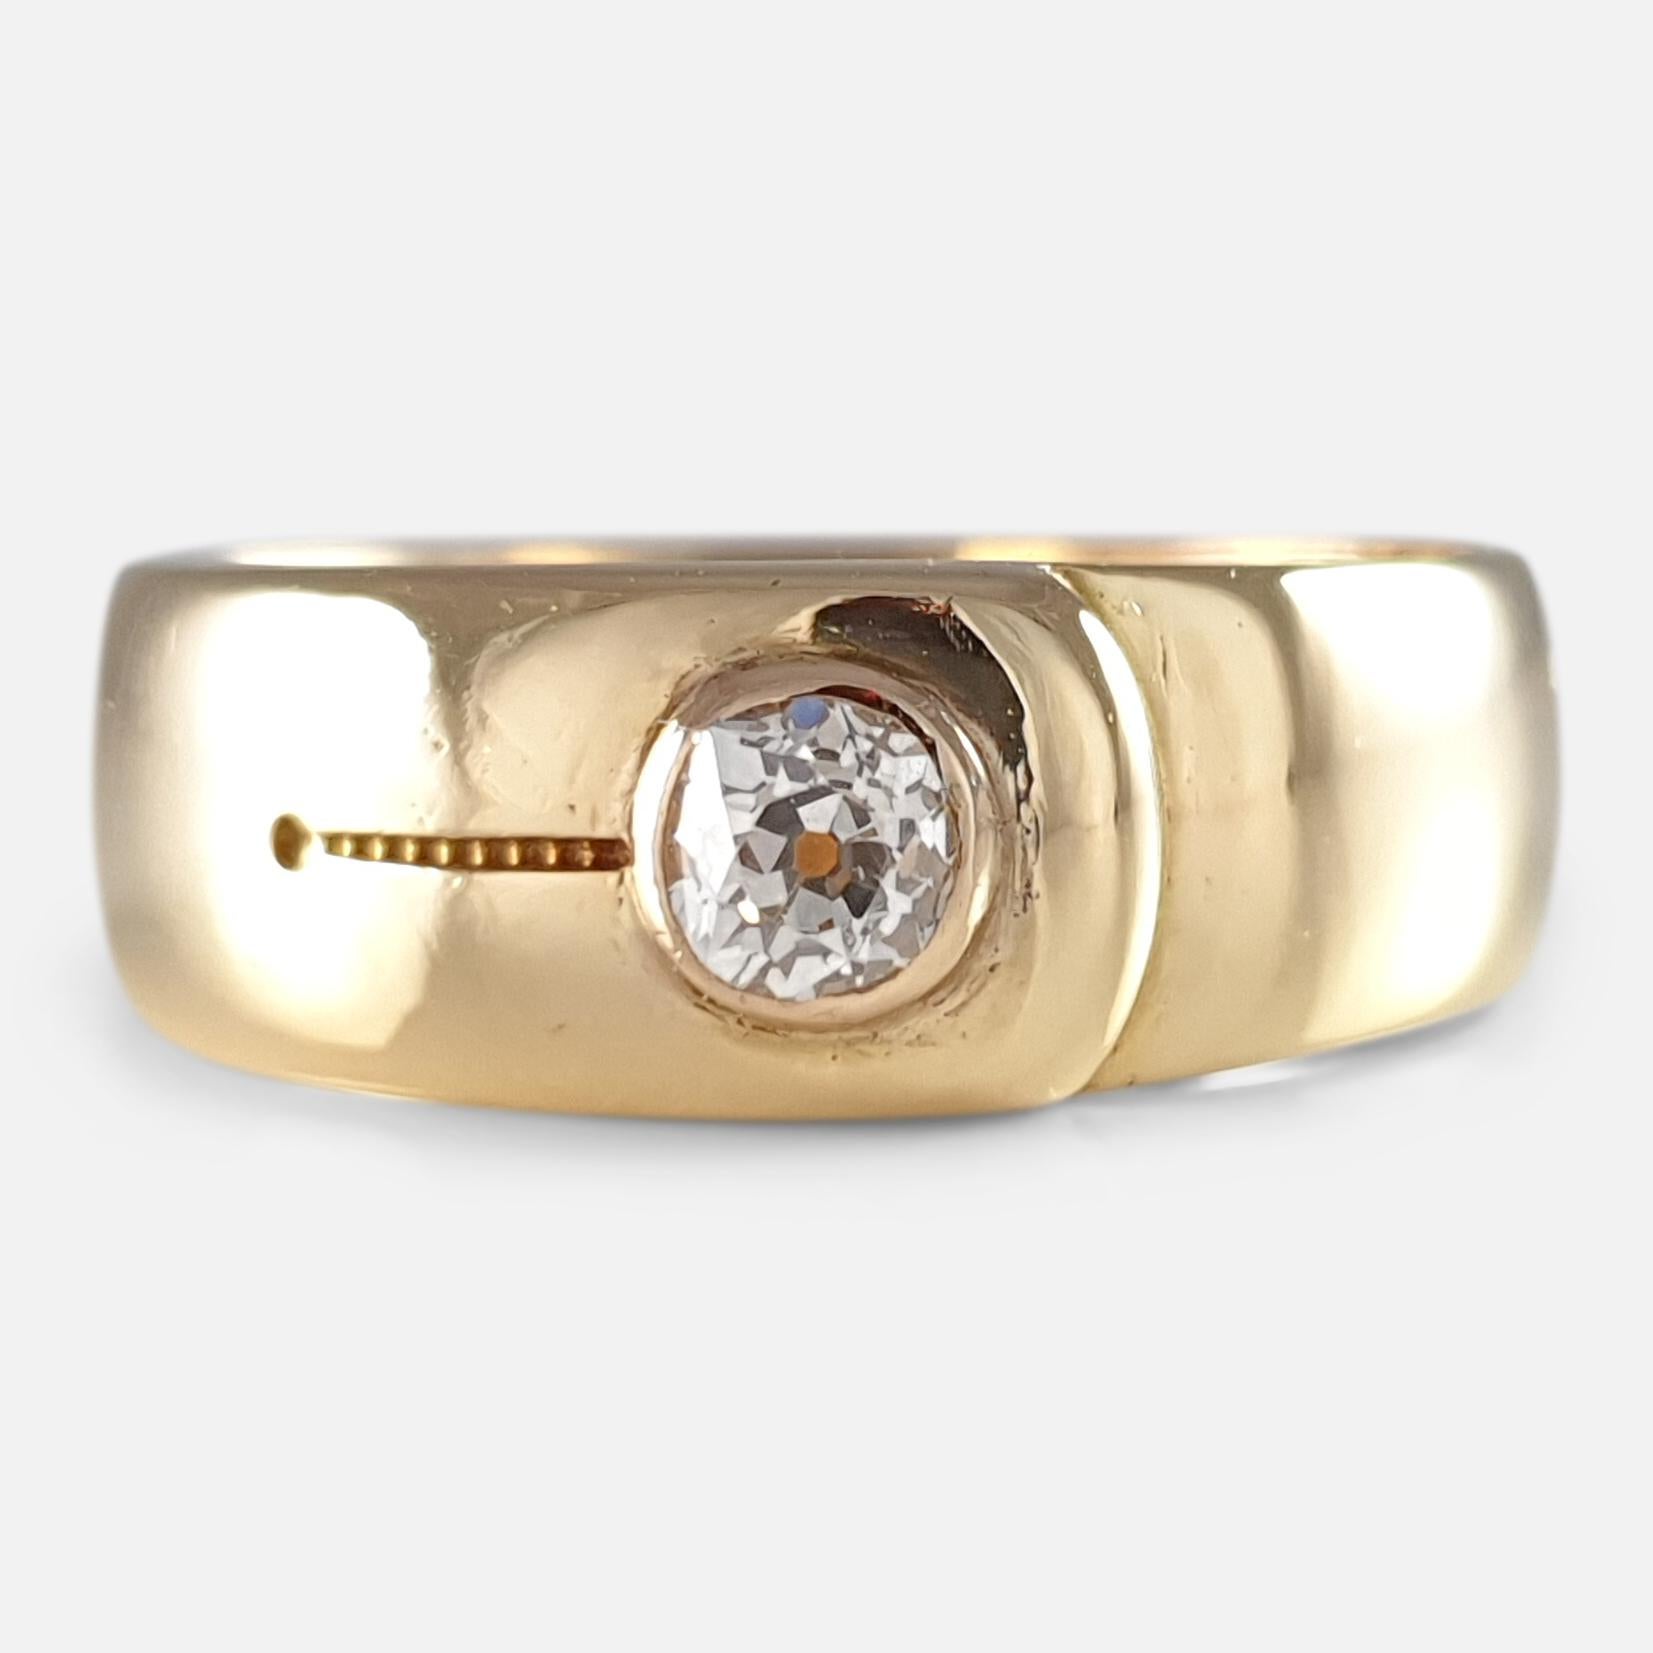 Victorian 18 Carat Yellow Gold and Diamond Buckle Ring, Chester, 1884 For Sale 4